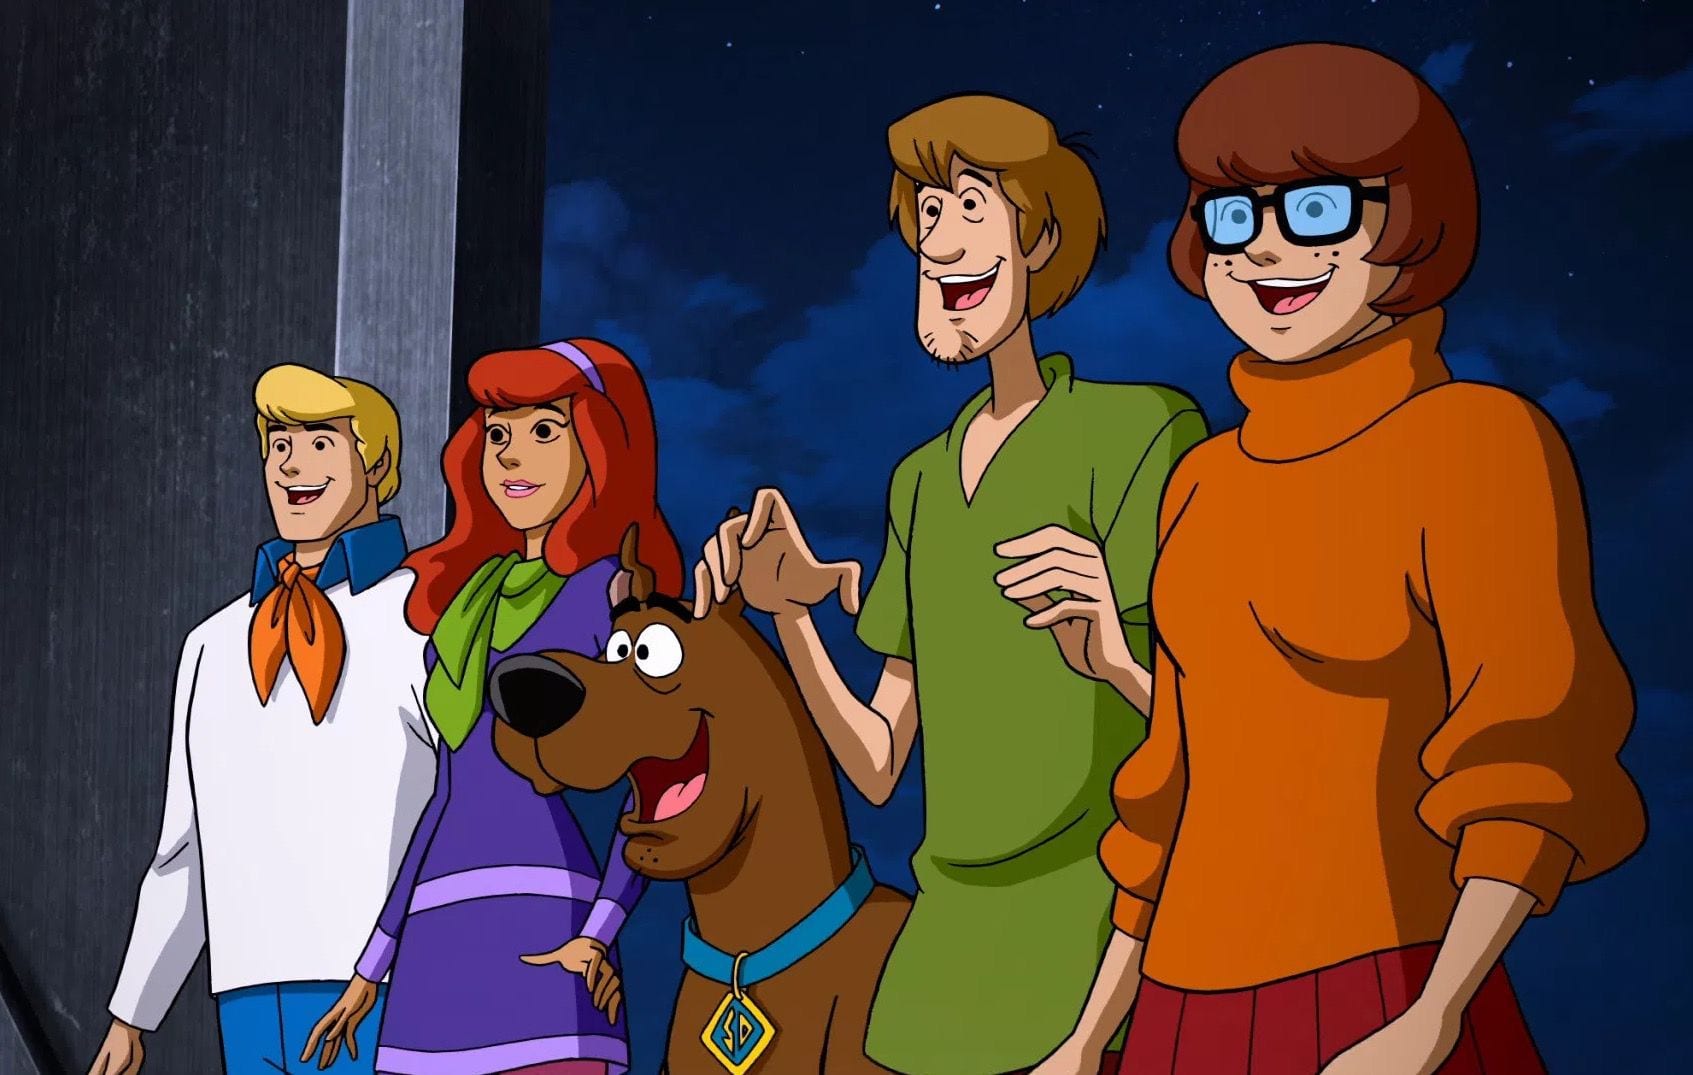 Jeepers! Scooby-Doo is turning the big 5-0